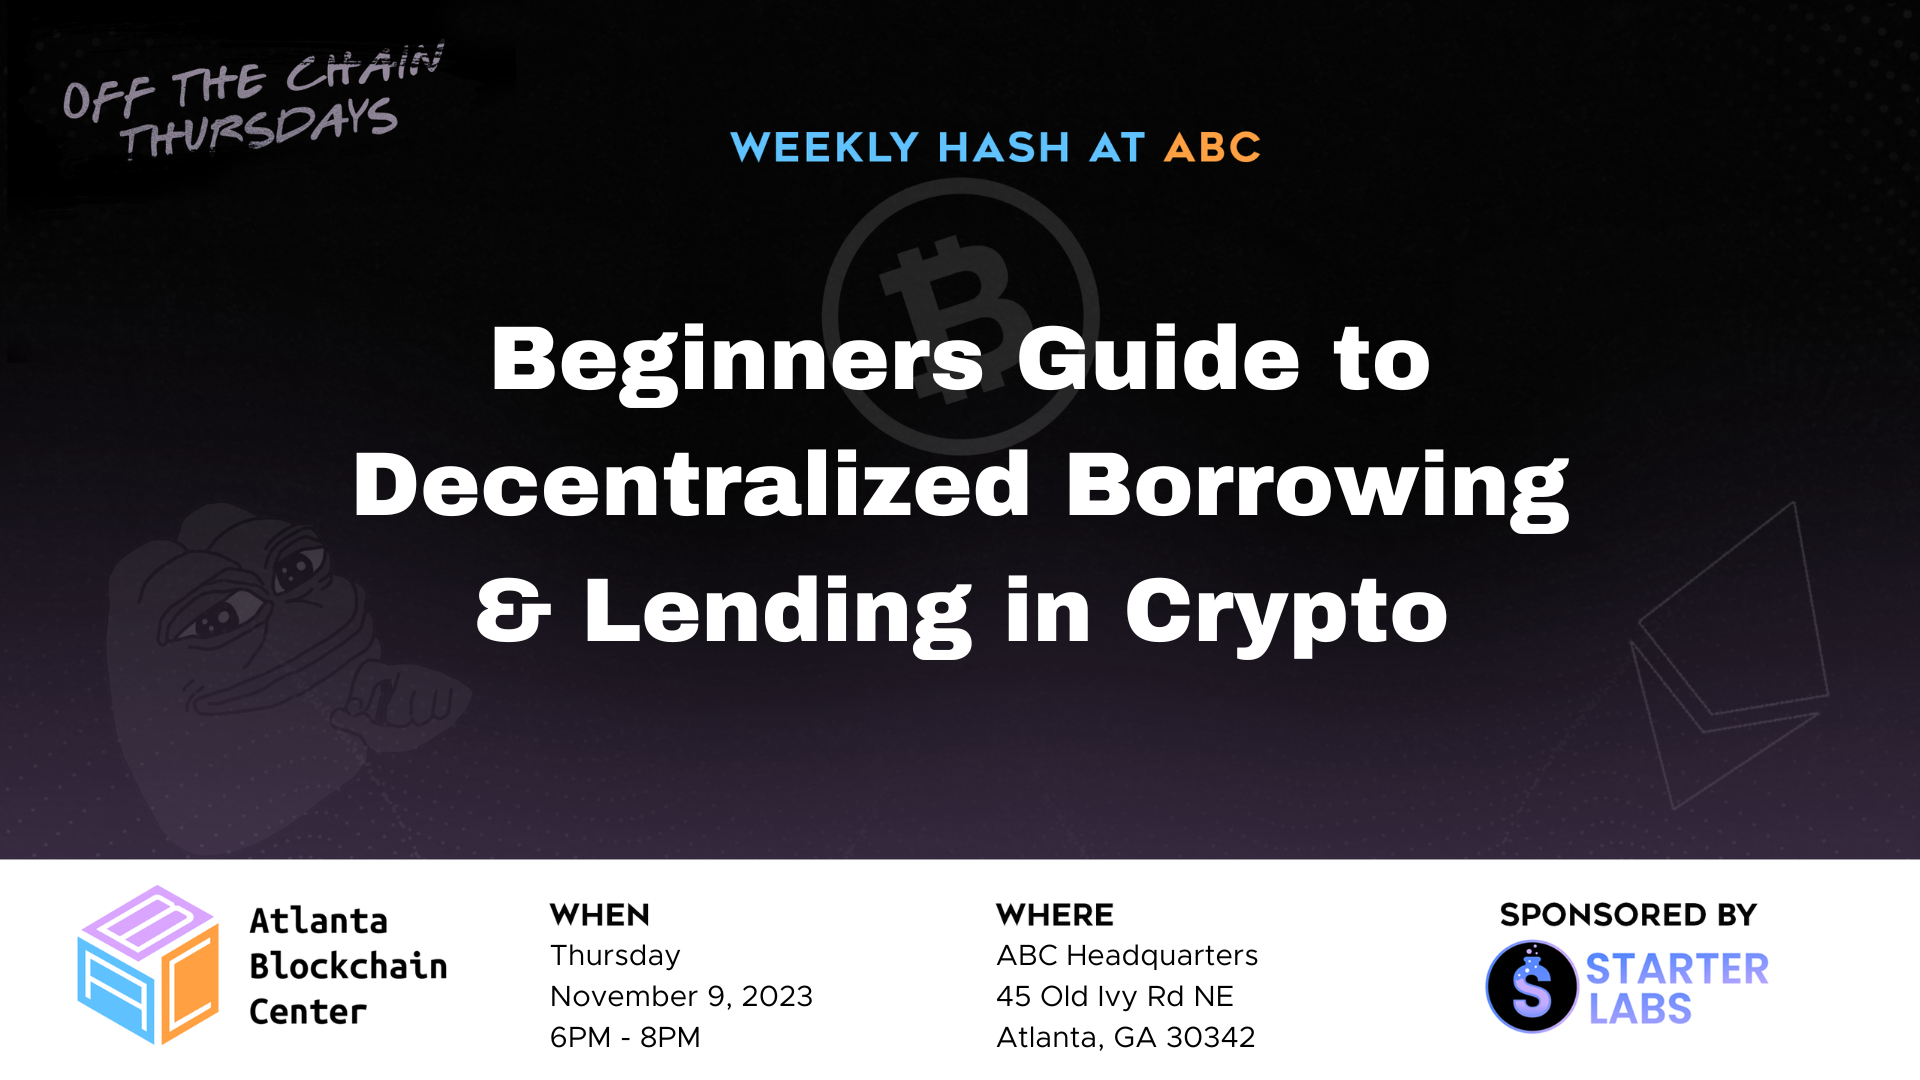 Weekly Hash @ ABC – Beginners Guide to Borrowing & Lending in Crypto